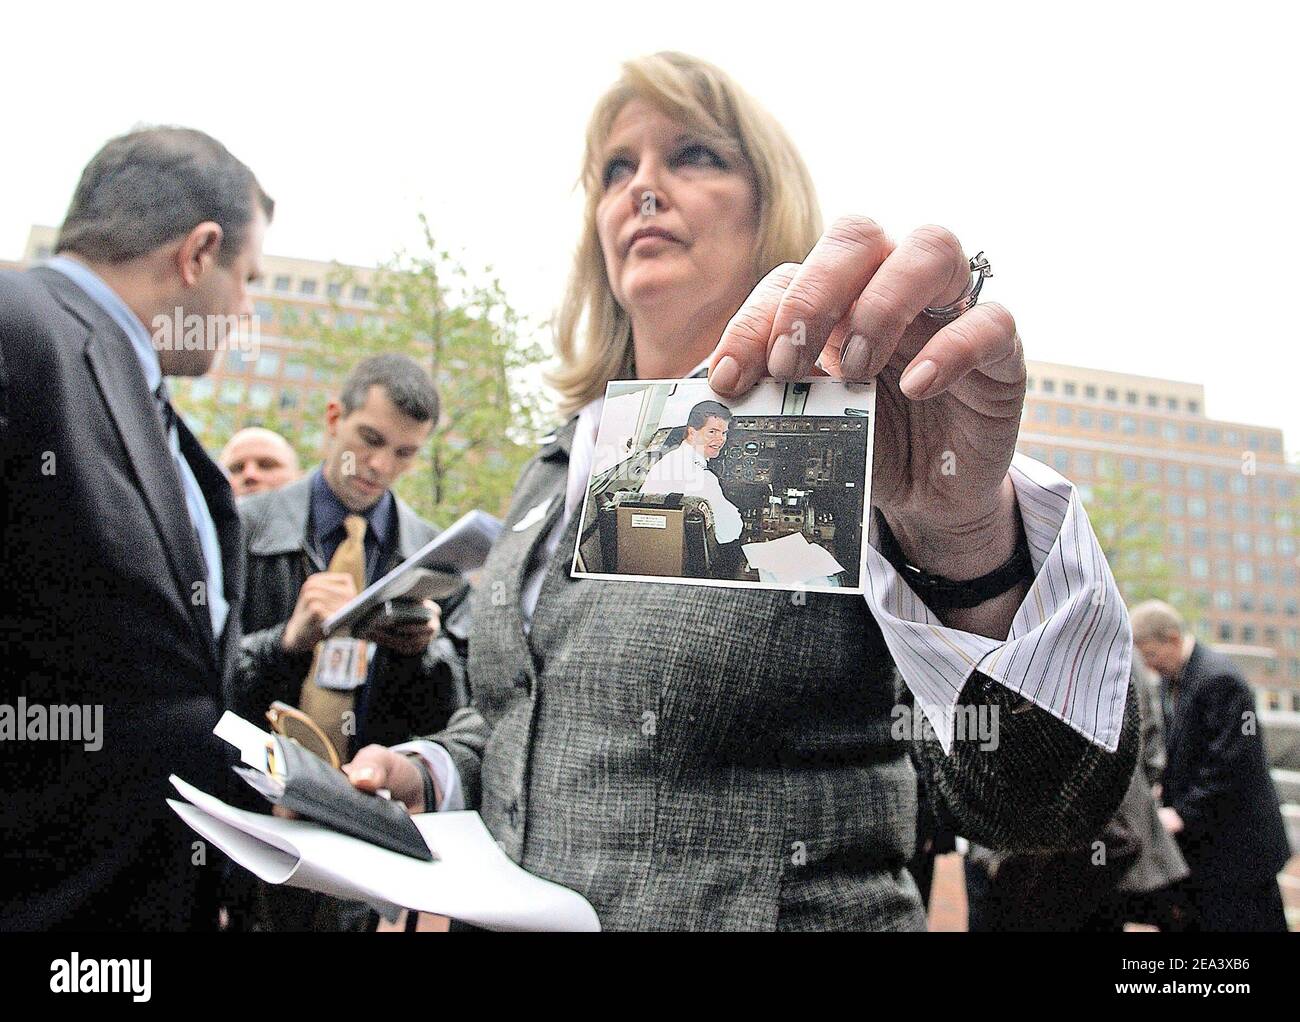 Debra Burlingane shows a picture of husband Charles , pilot of flight 77 , who died on September attacks accused Sept. 11 after the verdict of conspirator Zacarias Moussaoui who appears in court and pleads guilty to charges related to the 9/11 attacks in Alexandria, Virginia on April 22 2005. Moussaoui, a 36 year-old French citizen of Moroccan descent, has been charged with six counts of conspiracy in relation to the Sept. 11, 2001 hijackings that killed nearly 3,000 people. He is charged with conspiring with al Qaeda in the attacks. Four of the conspiracy counts against Moussaoui, carry the d Stock Photo